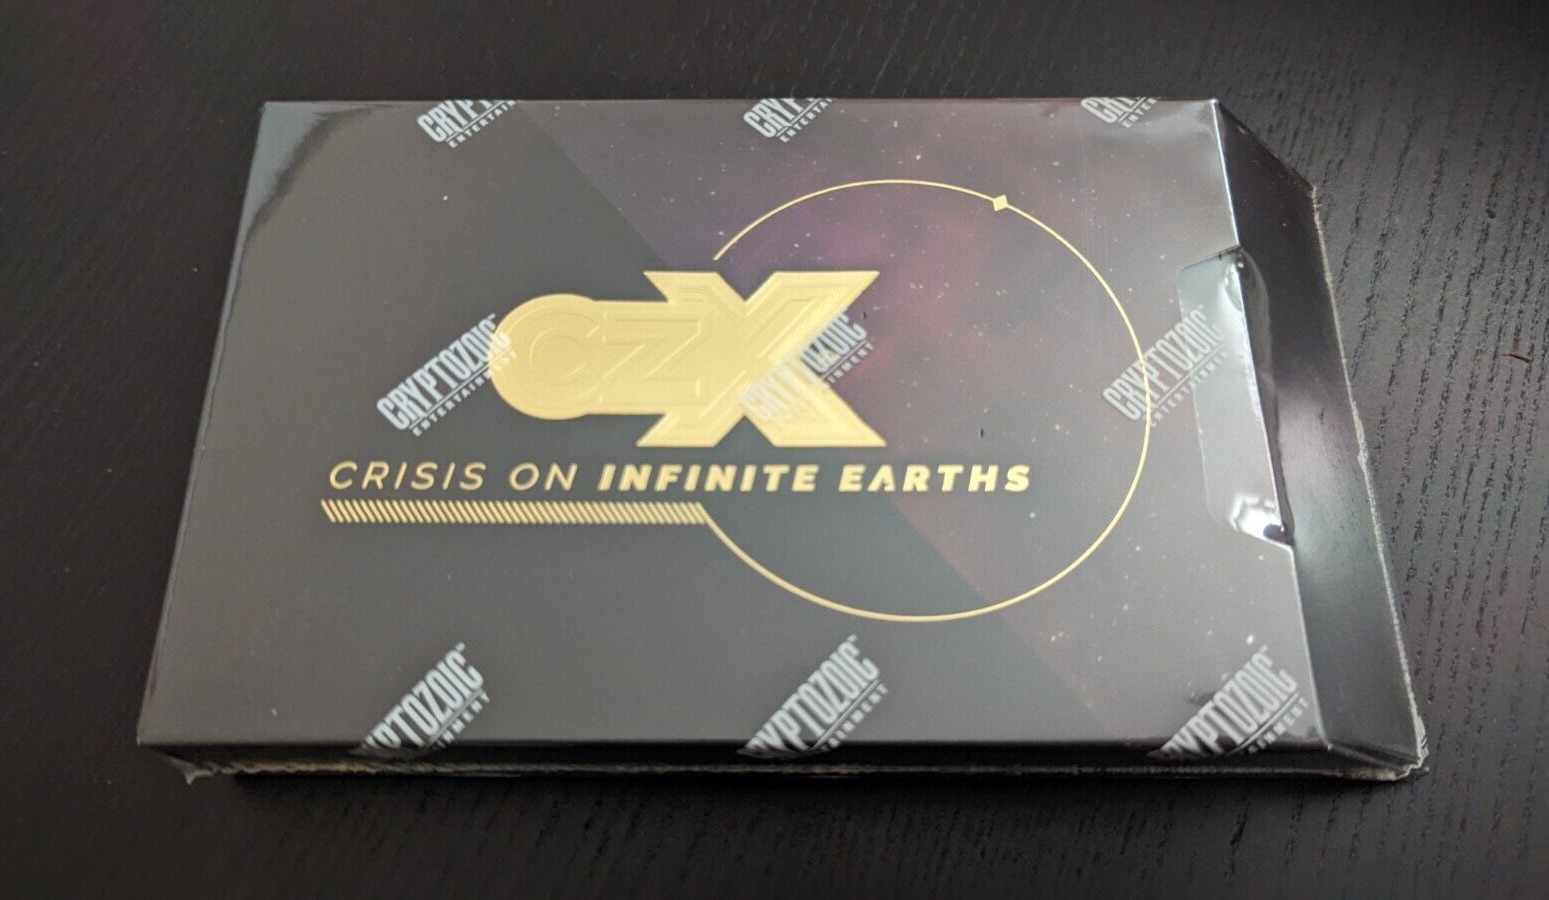 FACTORY SEALED - CZX Crisis on Infinite Earths Hobby Box - CRYPTOZOIC